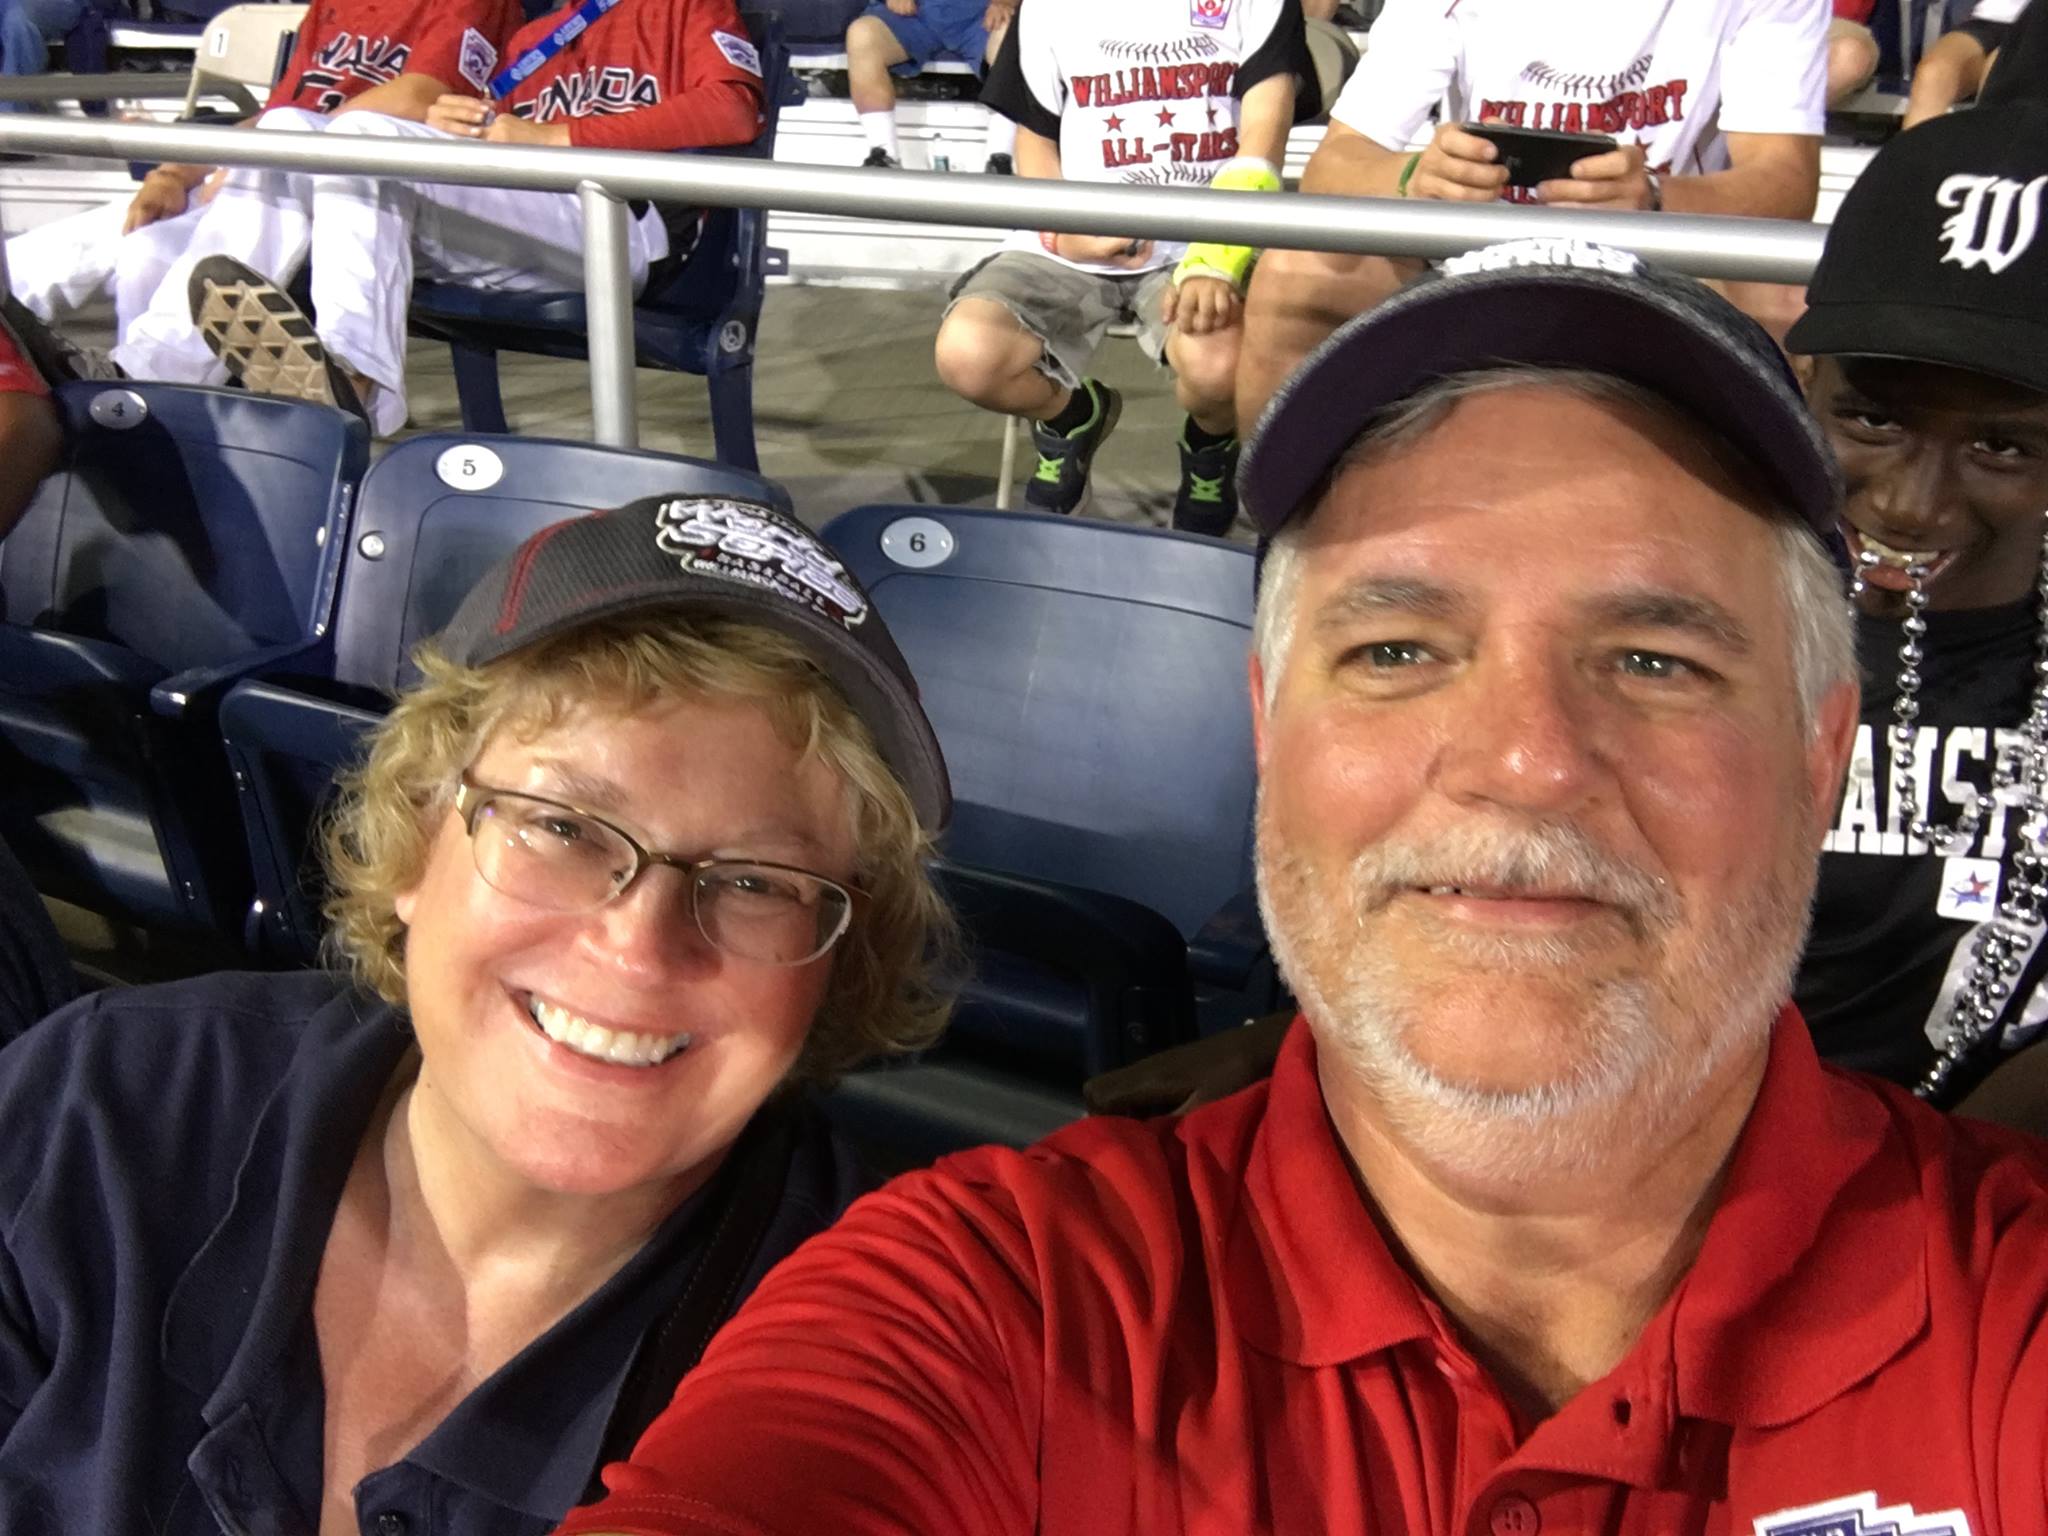 Cardinals-Pirates. And a photobomb from a Williamsport Area Little Leaguer. — with Robin Van Auken at BB&T Ballpark at Historic Bowman Field.